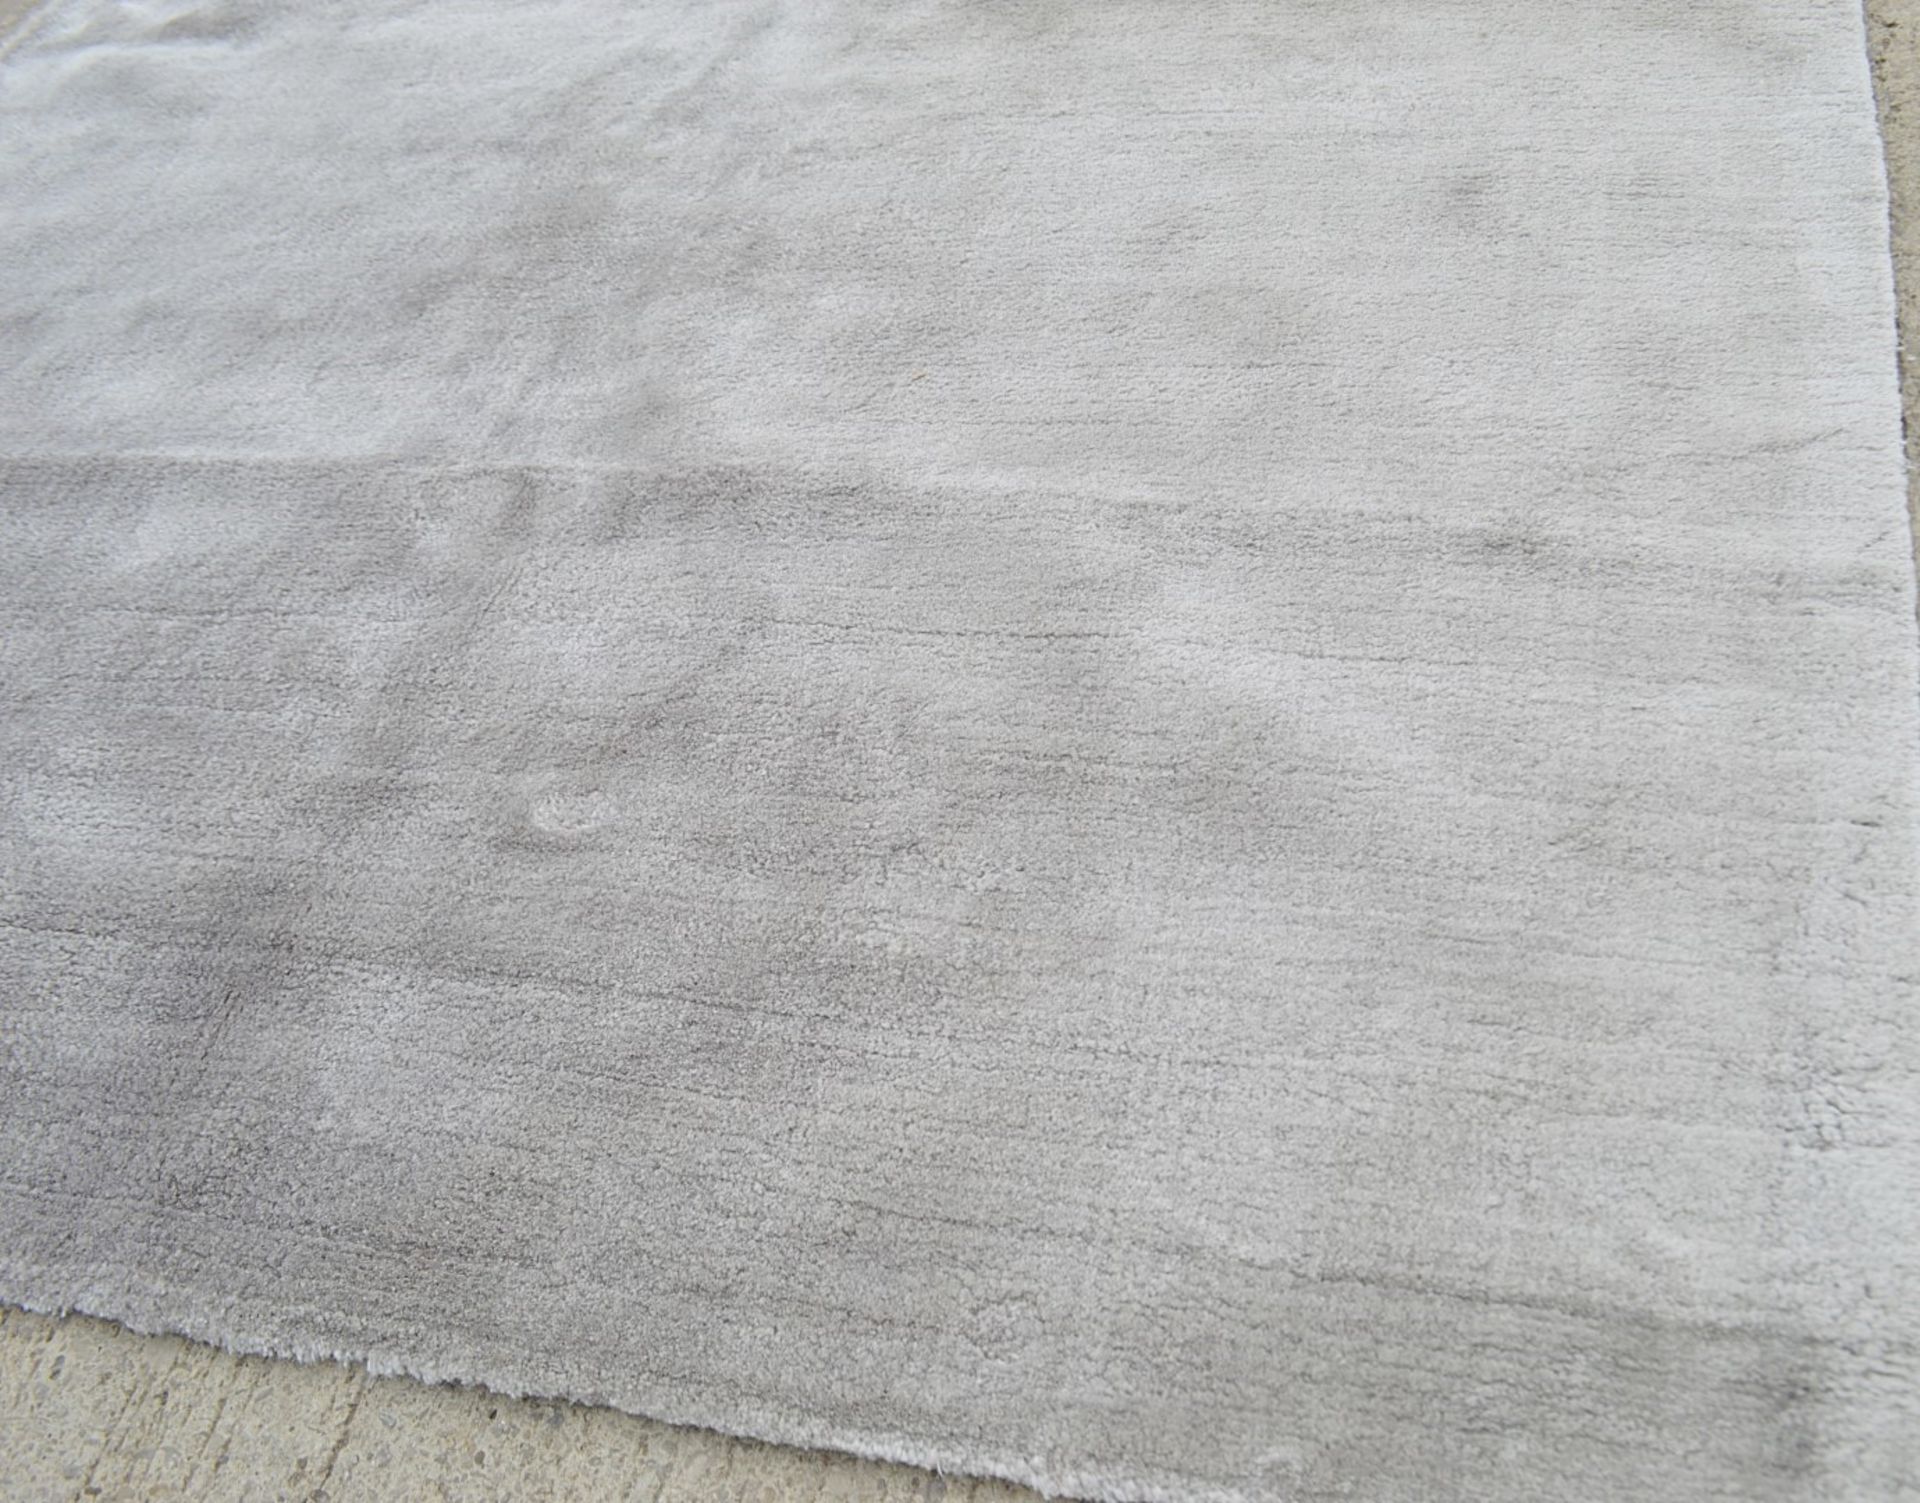 1 x Asiatic 'Dolce' Luxurious Rug in Silver - Dimensions (approx): 160x230cm - Ref: 6319128/ - Image 3 of 7